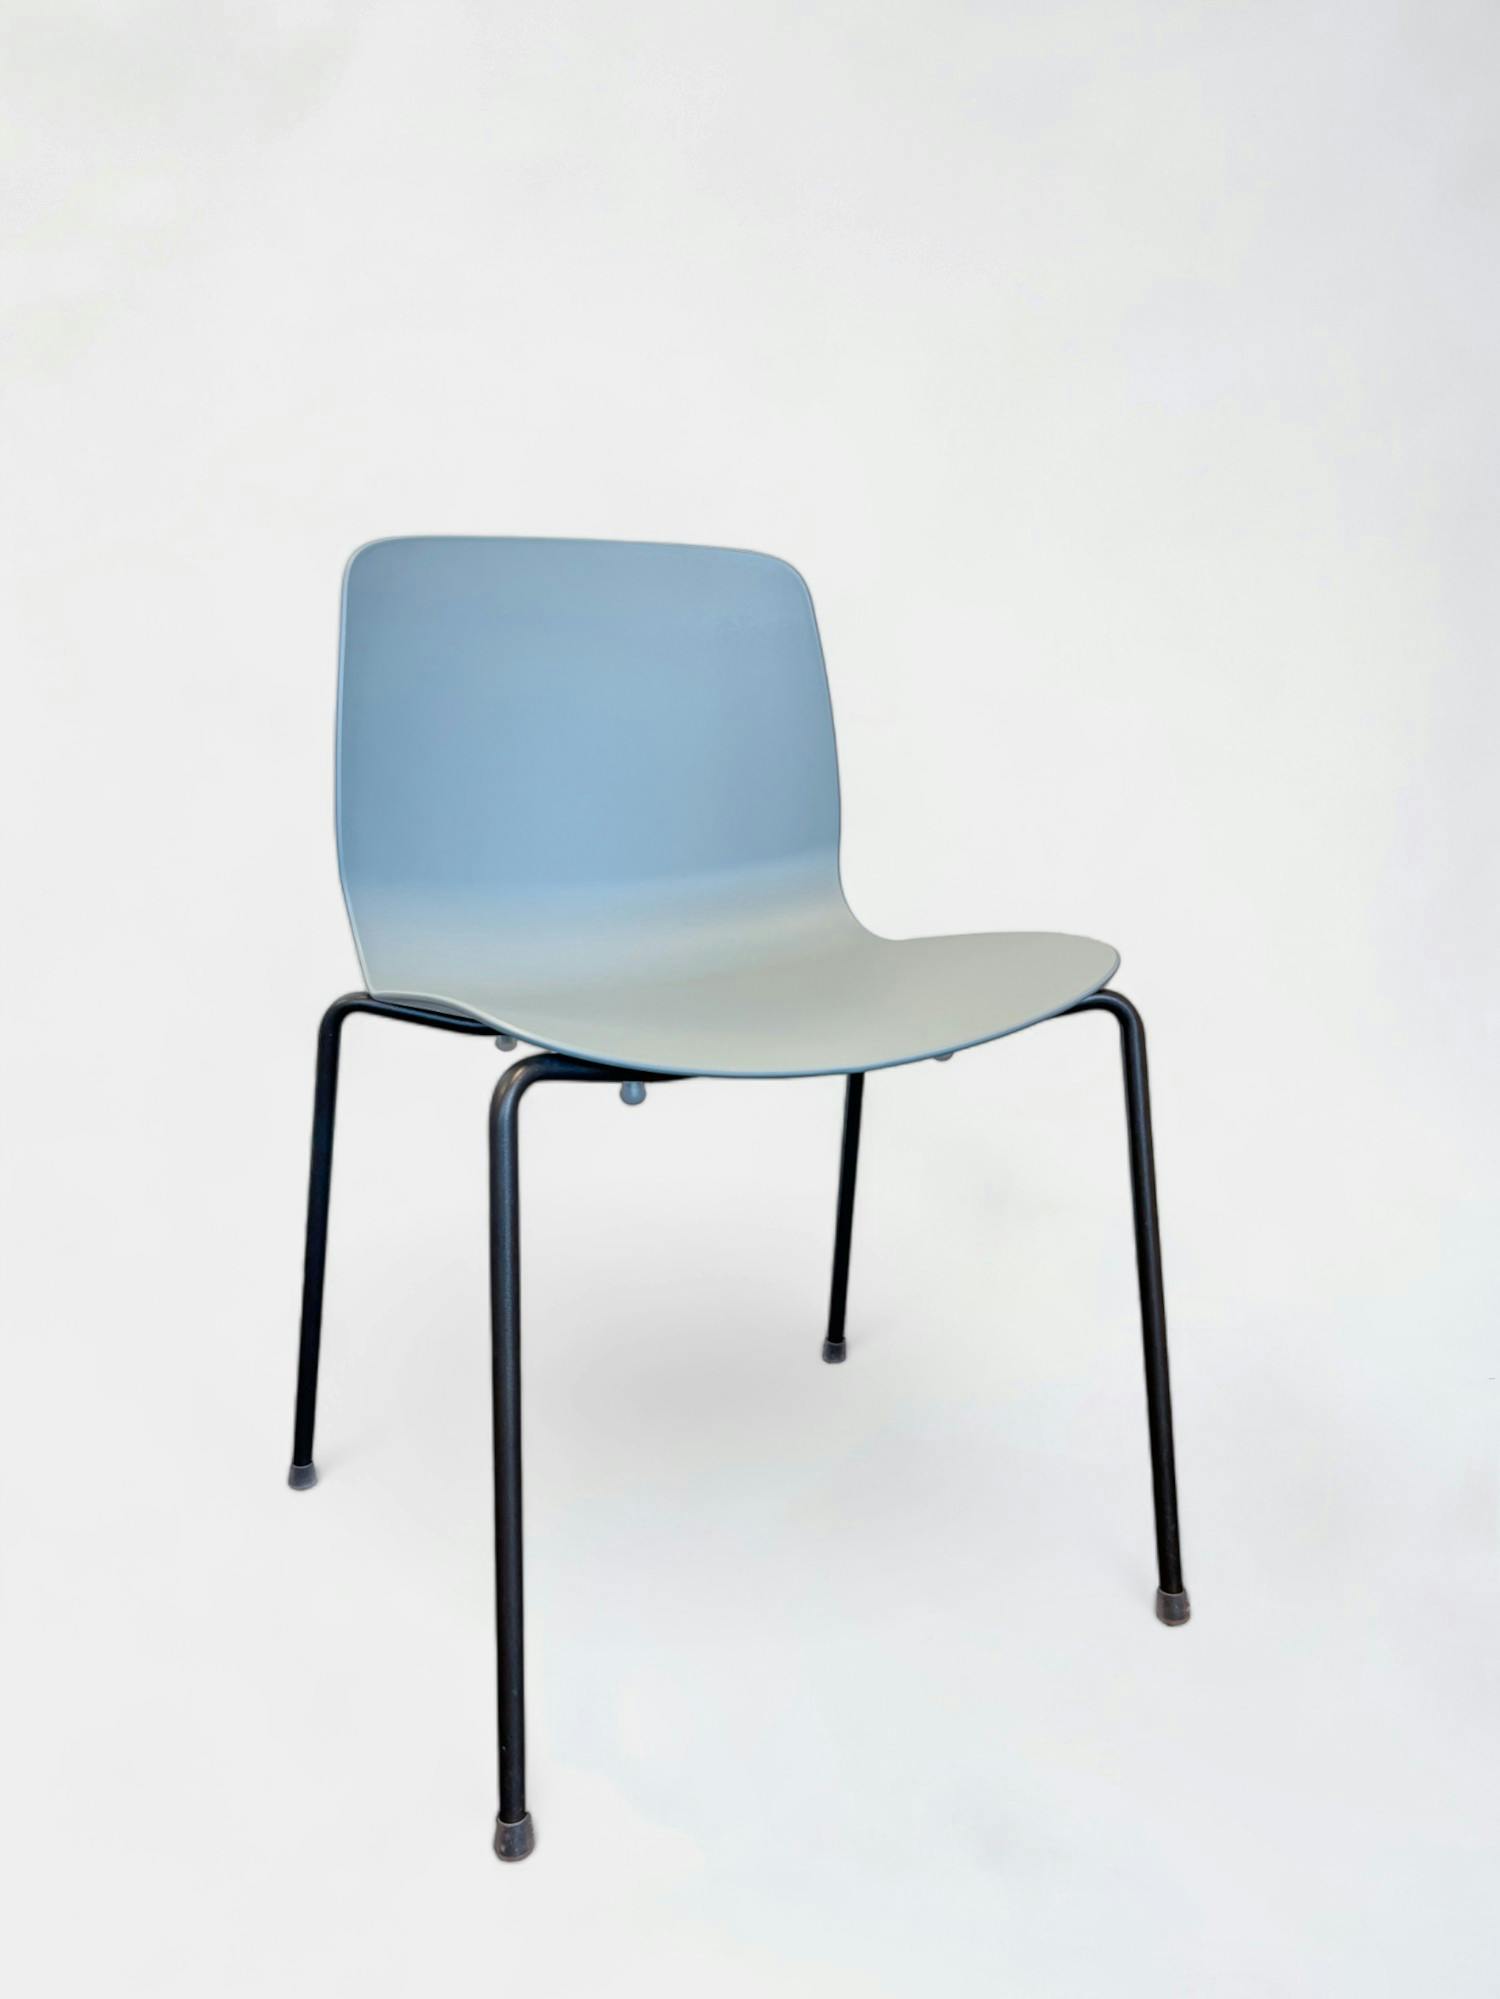 Light blue Plastic Chair with Chrome Steel Legs - Relieve Furniture